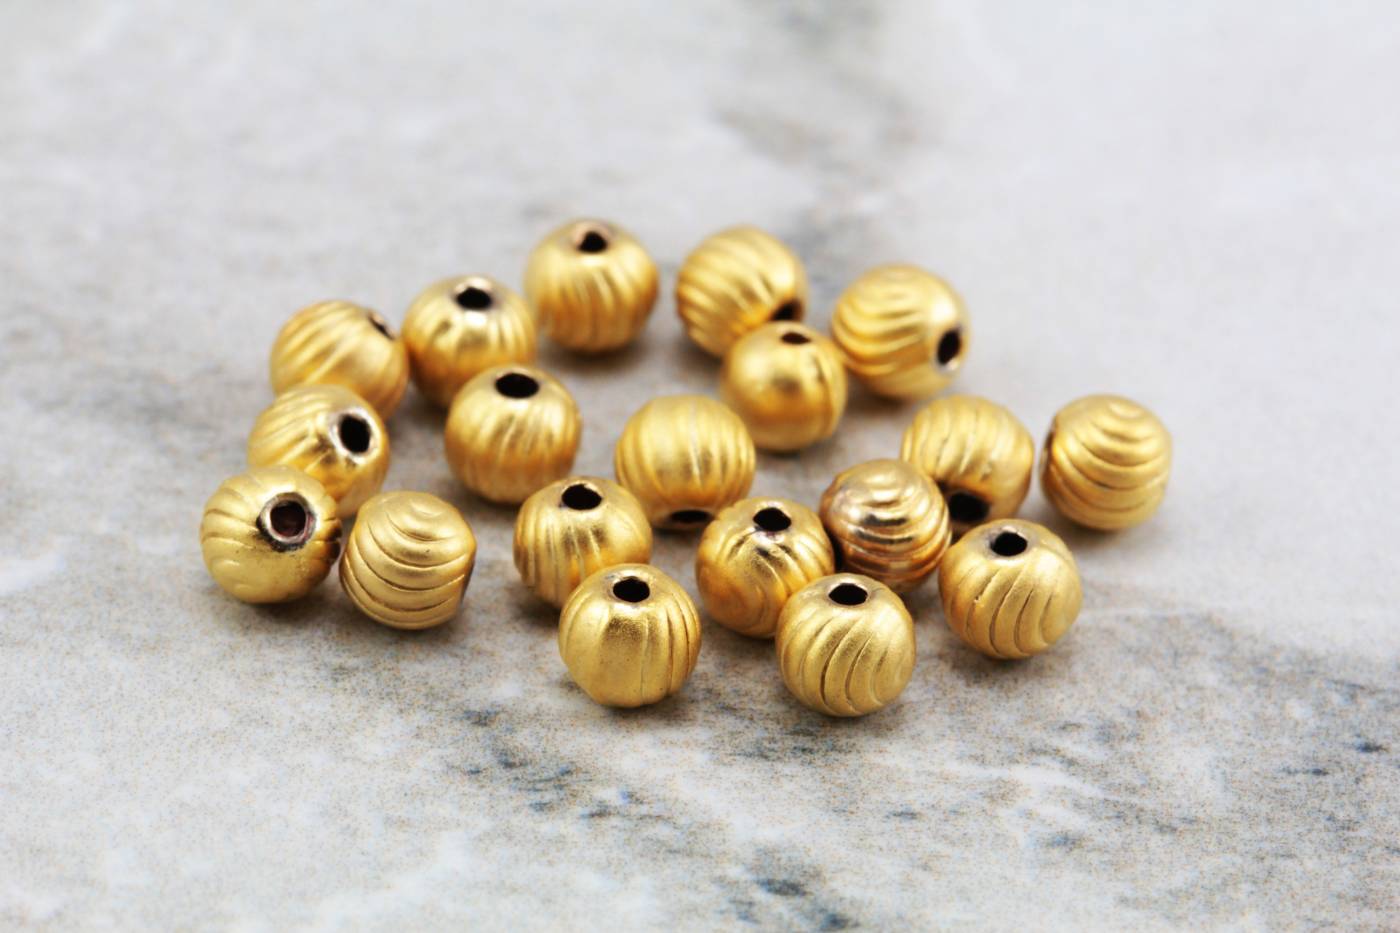 1200Pcs 4mm Smooth Round Beads Gold Spacer Loose Ball Beads for Bracelet  Jewelry Making Craft Gold 4mm